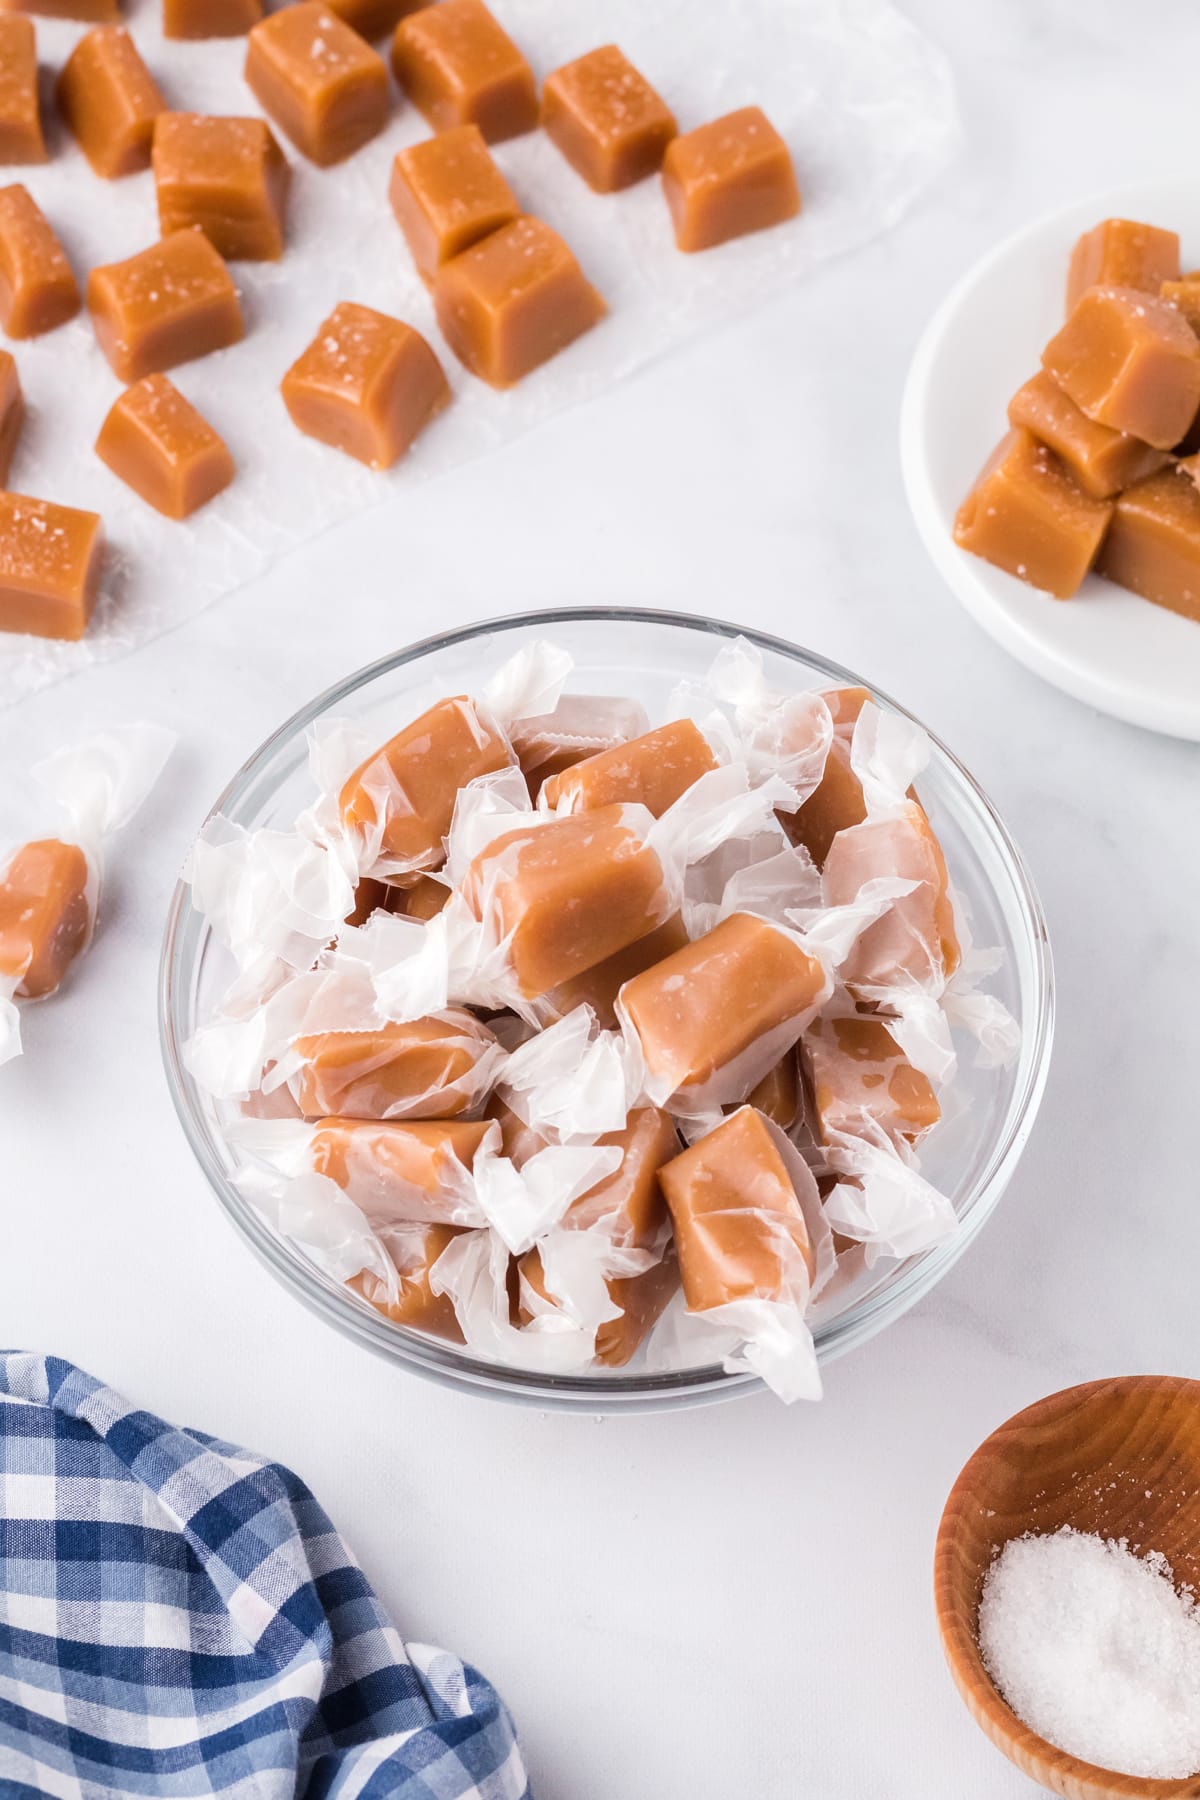 Overhead view of caramel candy in a glass bowl